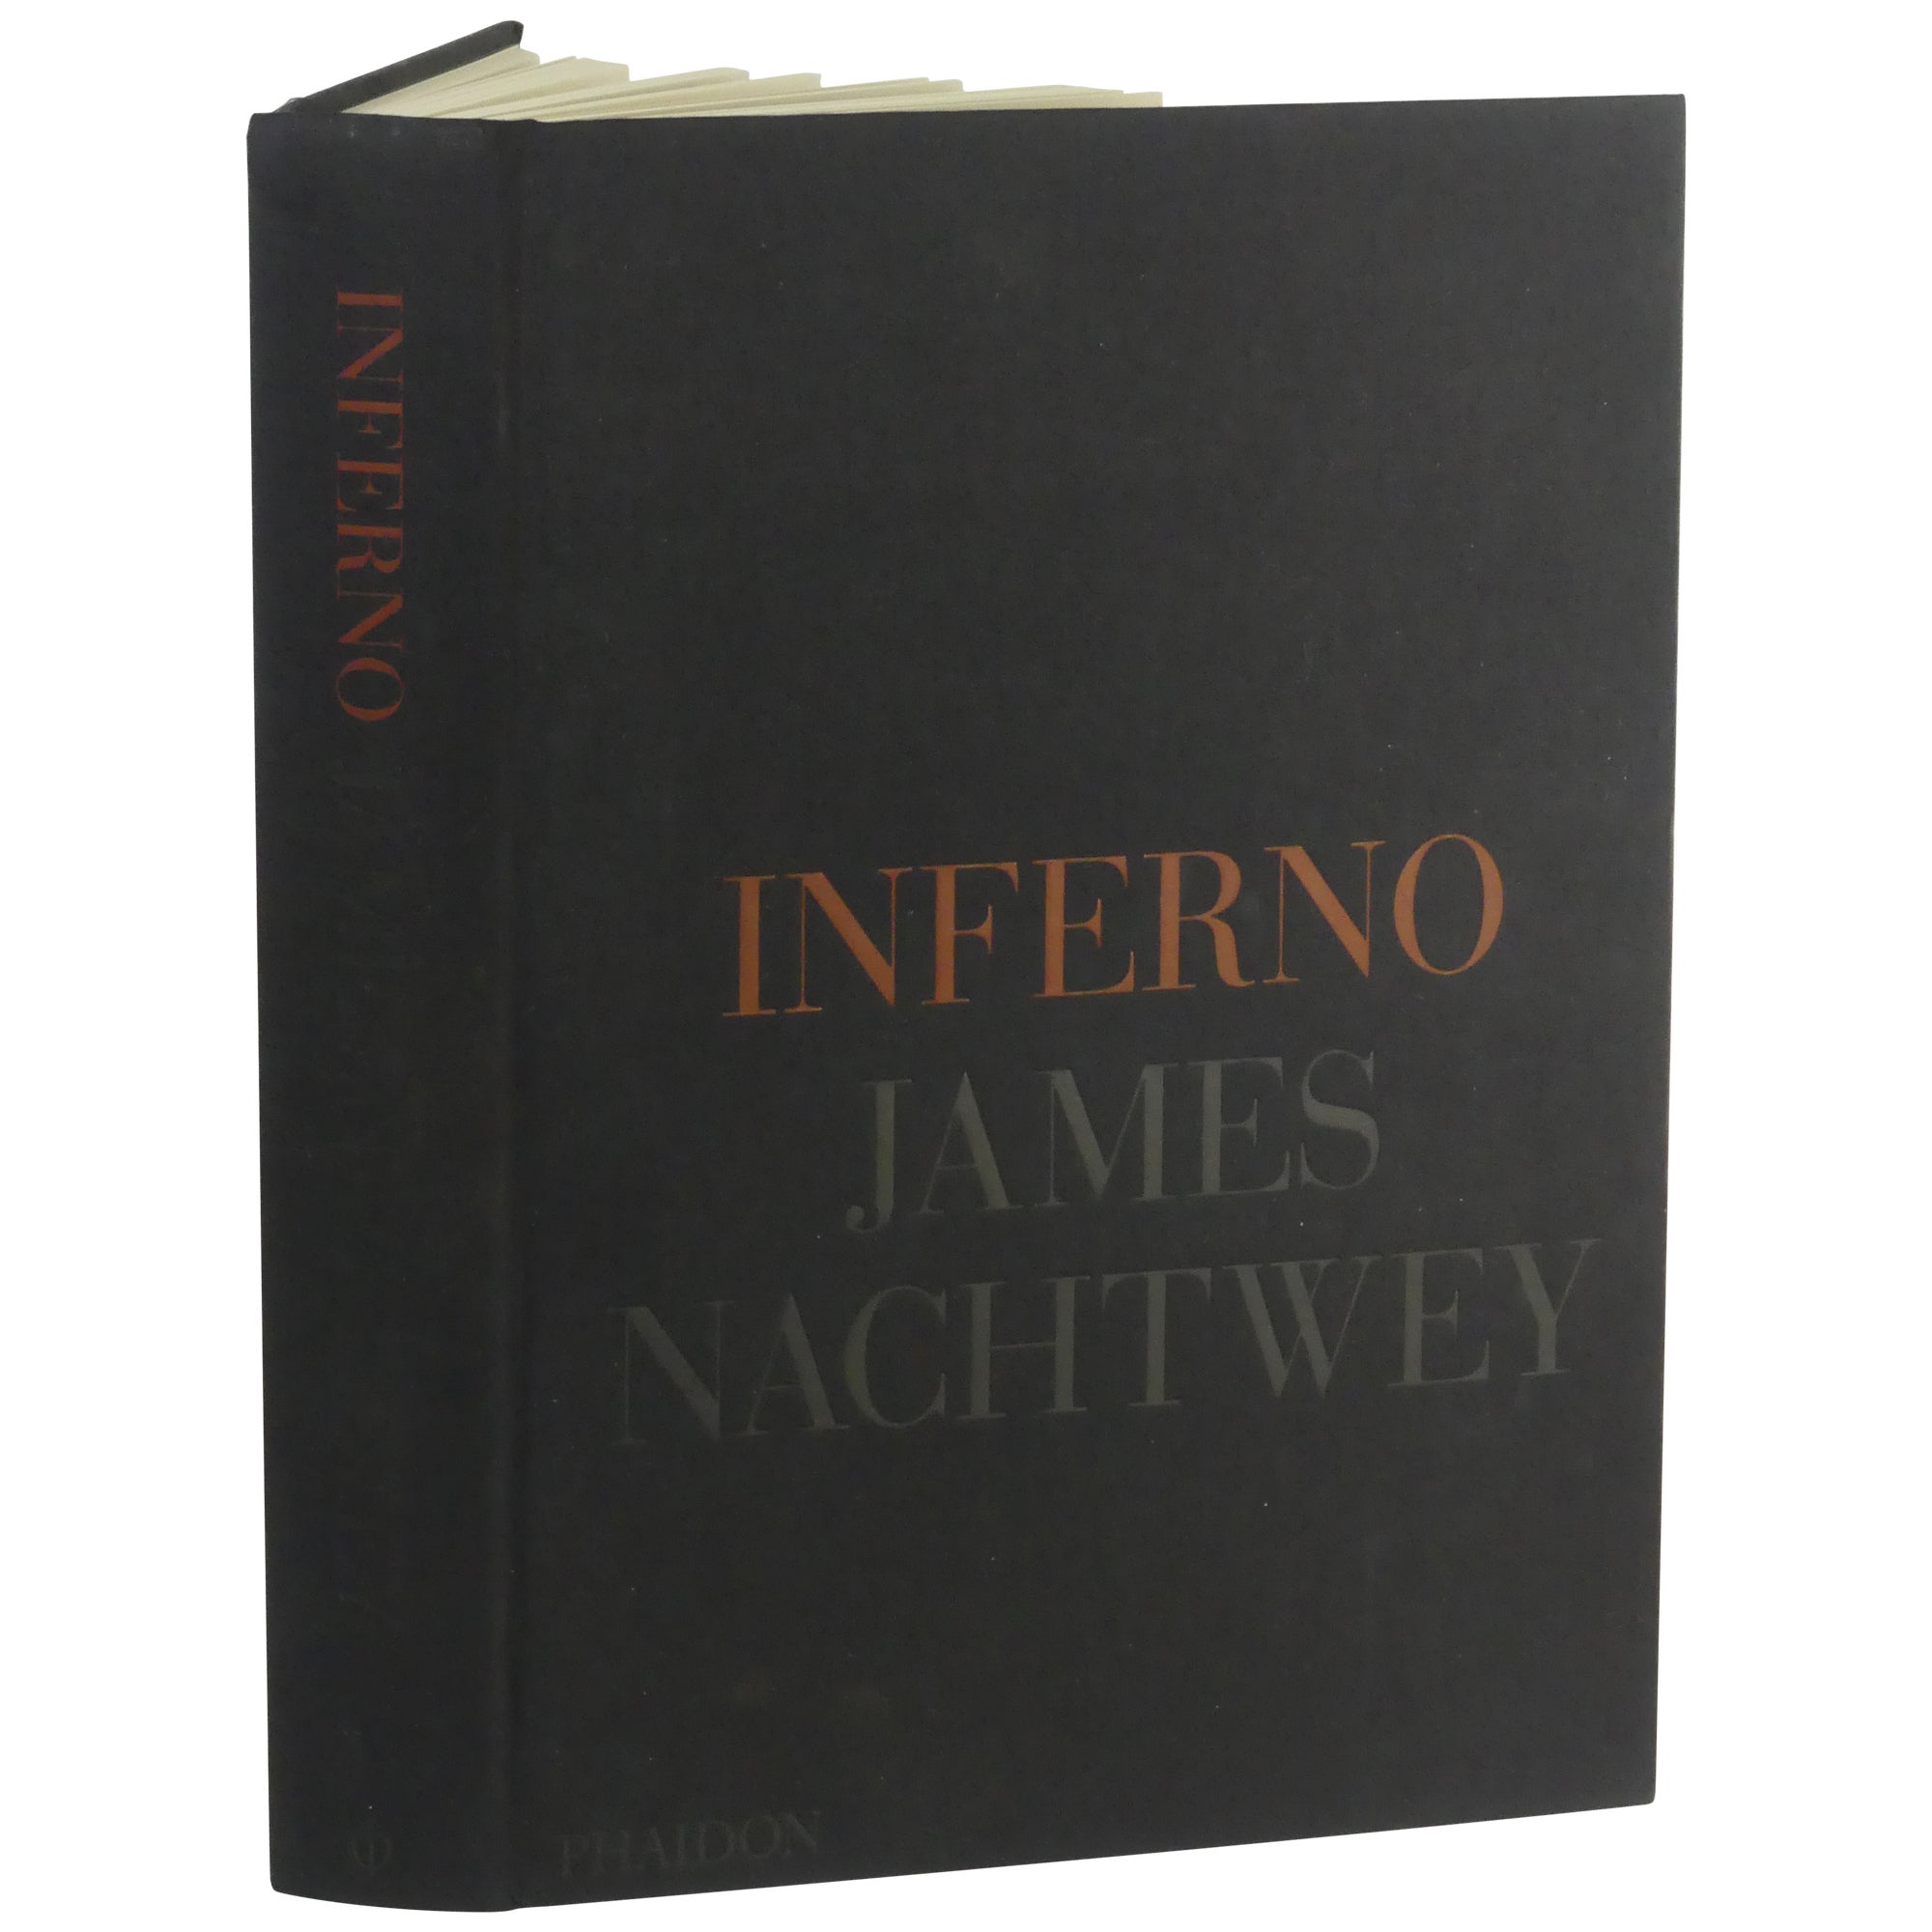 Inferno by James Nachtwey on Downtown Brown Books